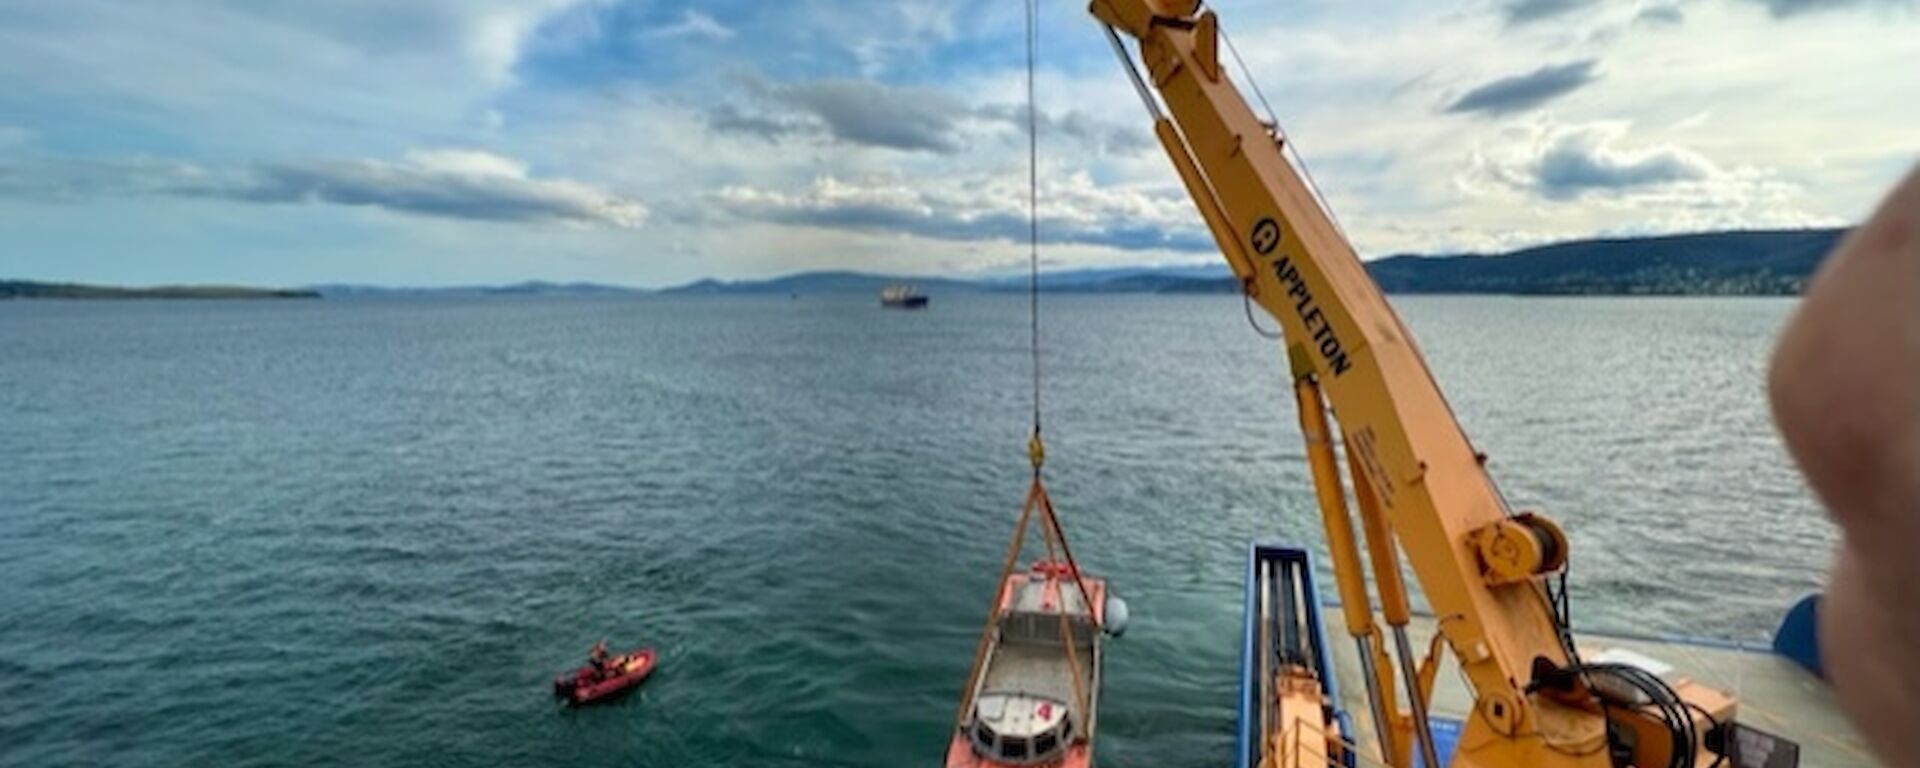 A LARC,(half truck, half boat) being lowered into the sea near Hobart.